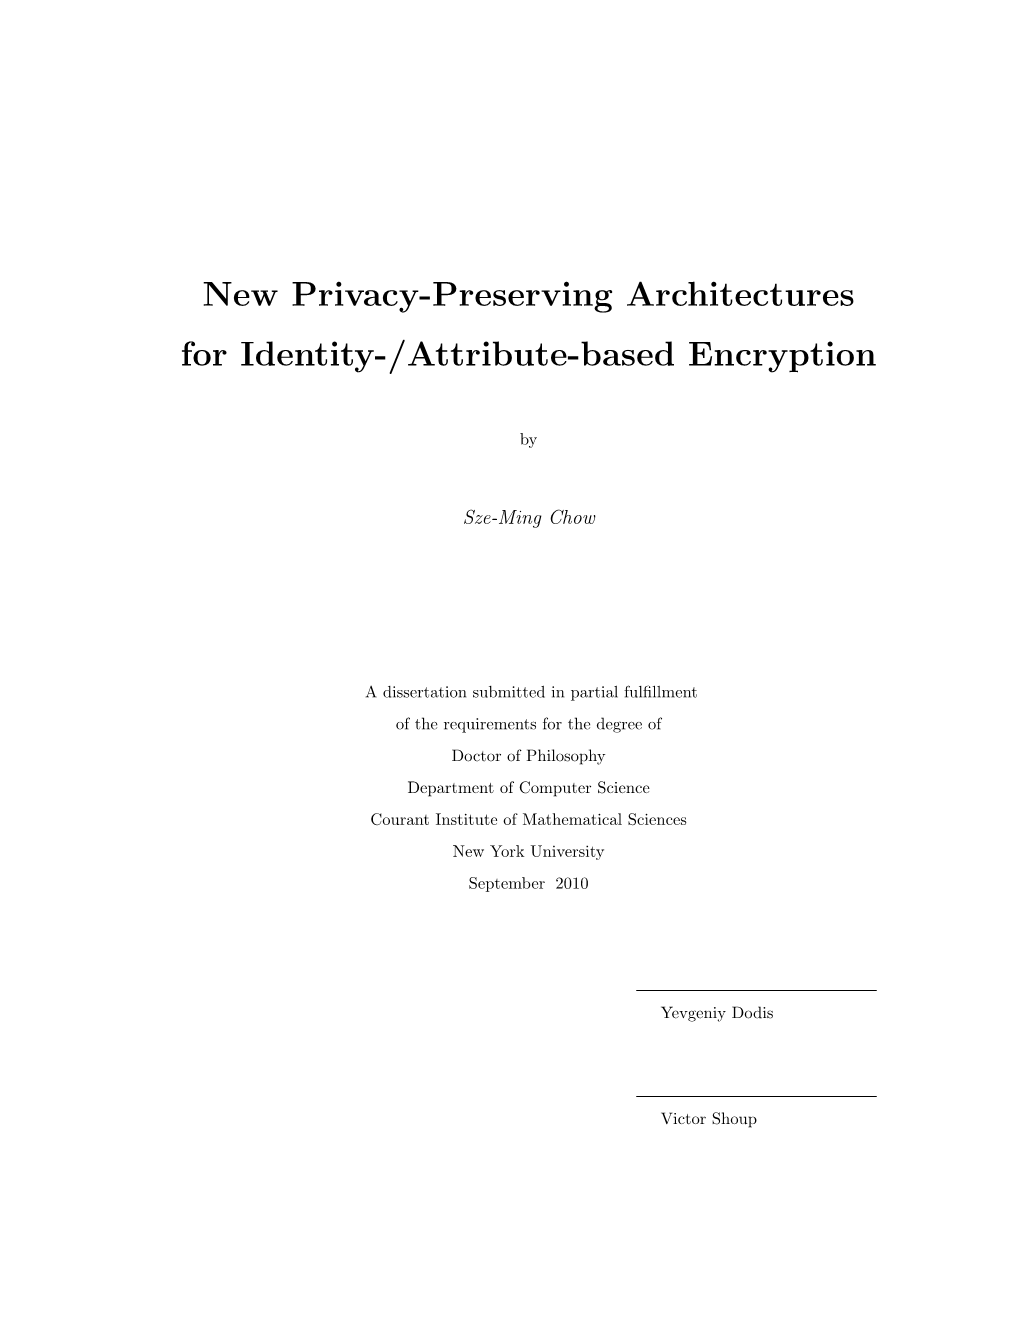 New Privacy-Preserving Architectures for Identity-/Attribute-Based Encryption